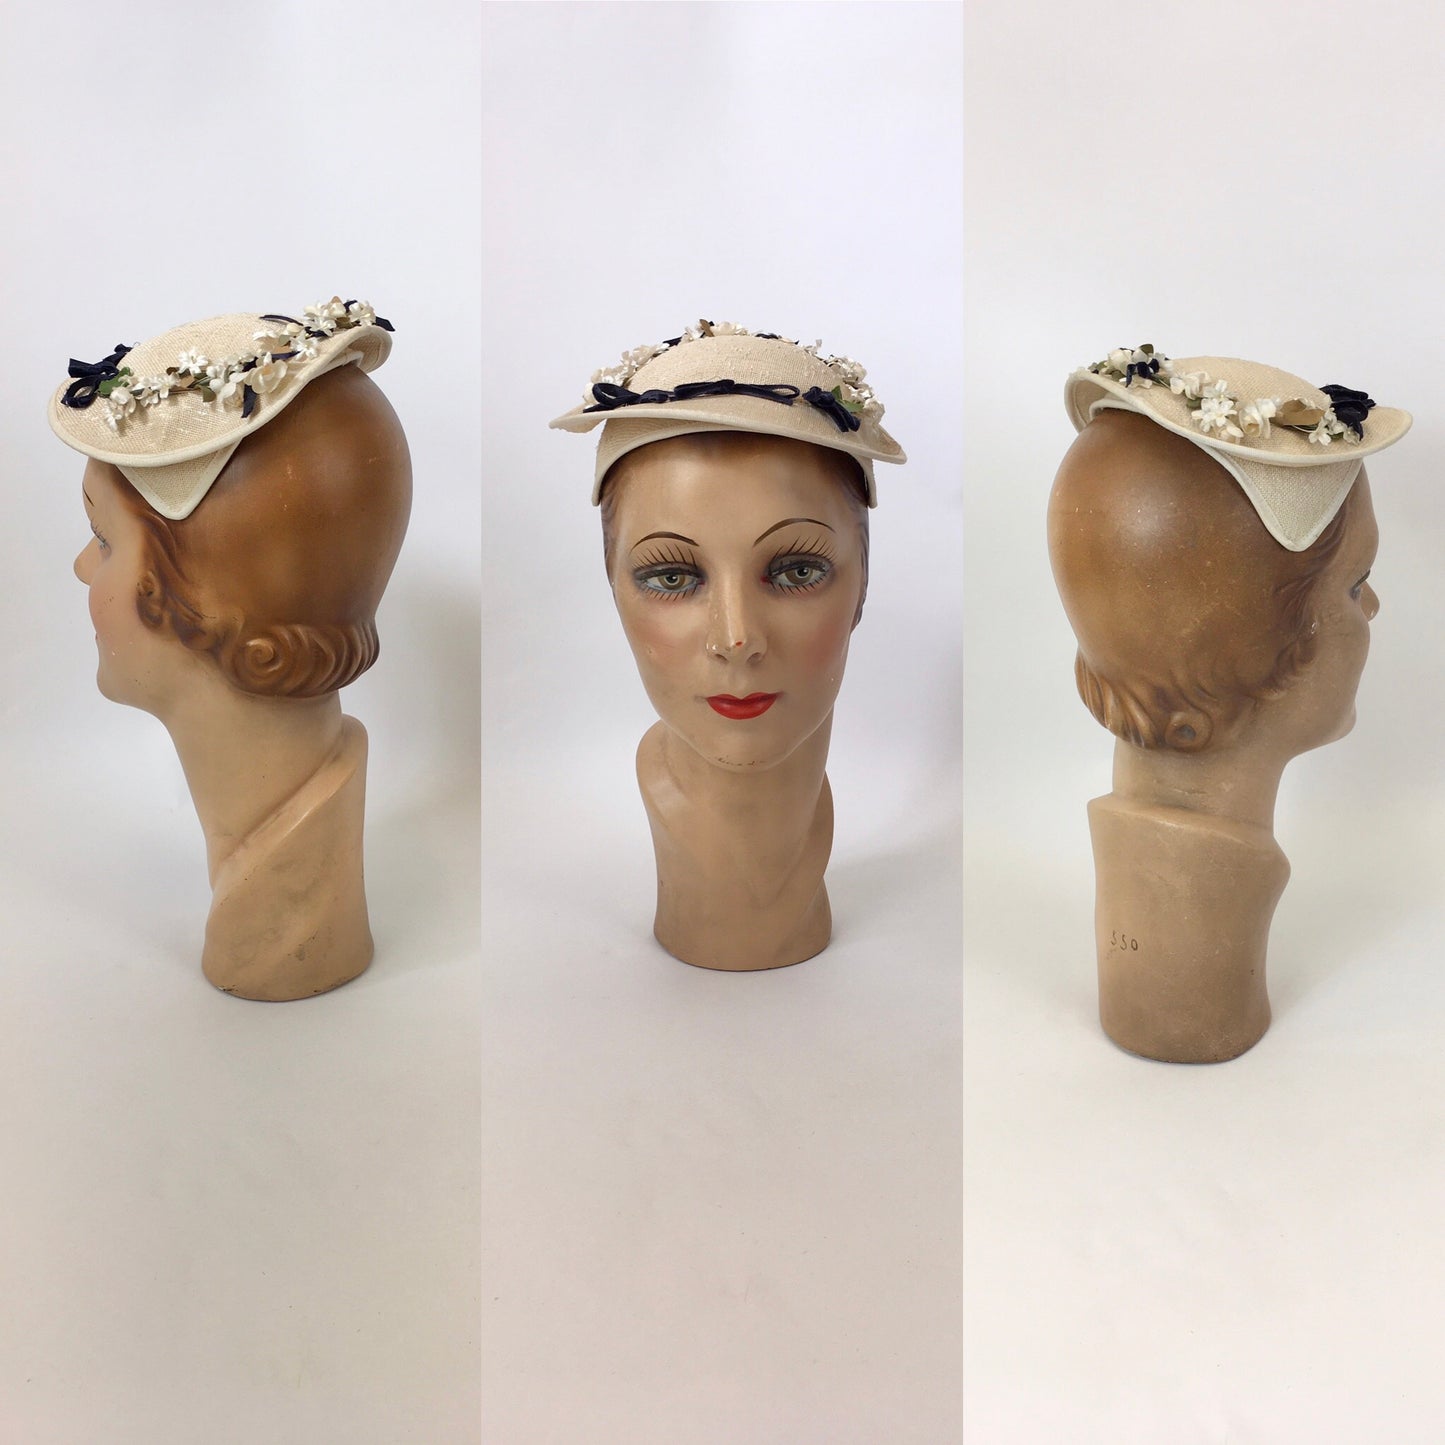 Original 1950’s Darling Natural Straw Headpiece - With Millinery Flora and Navy Velvet Bows